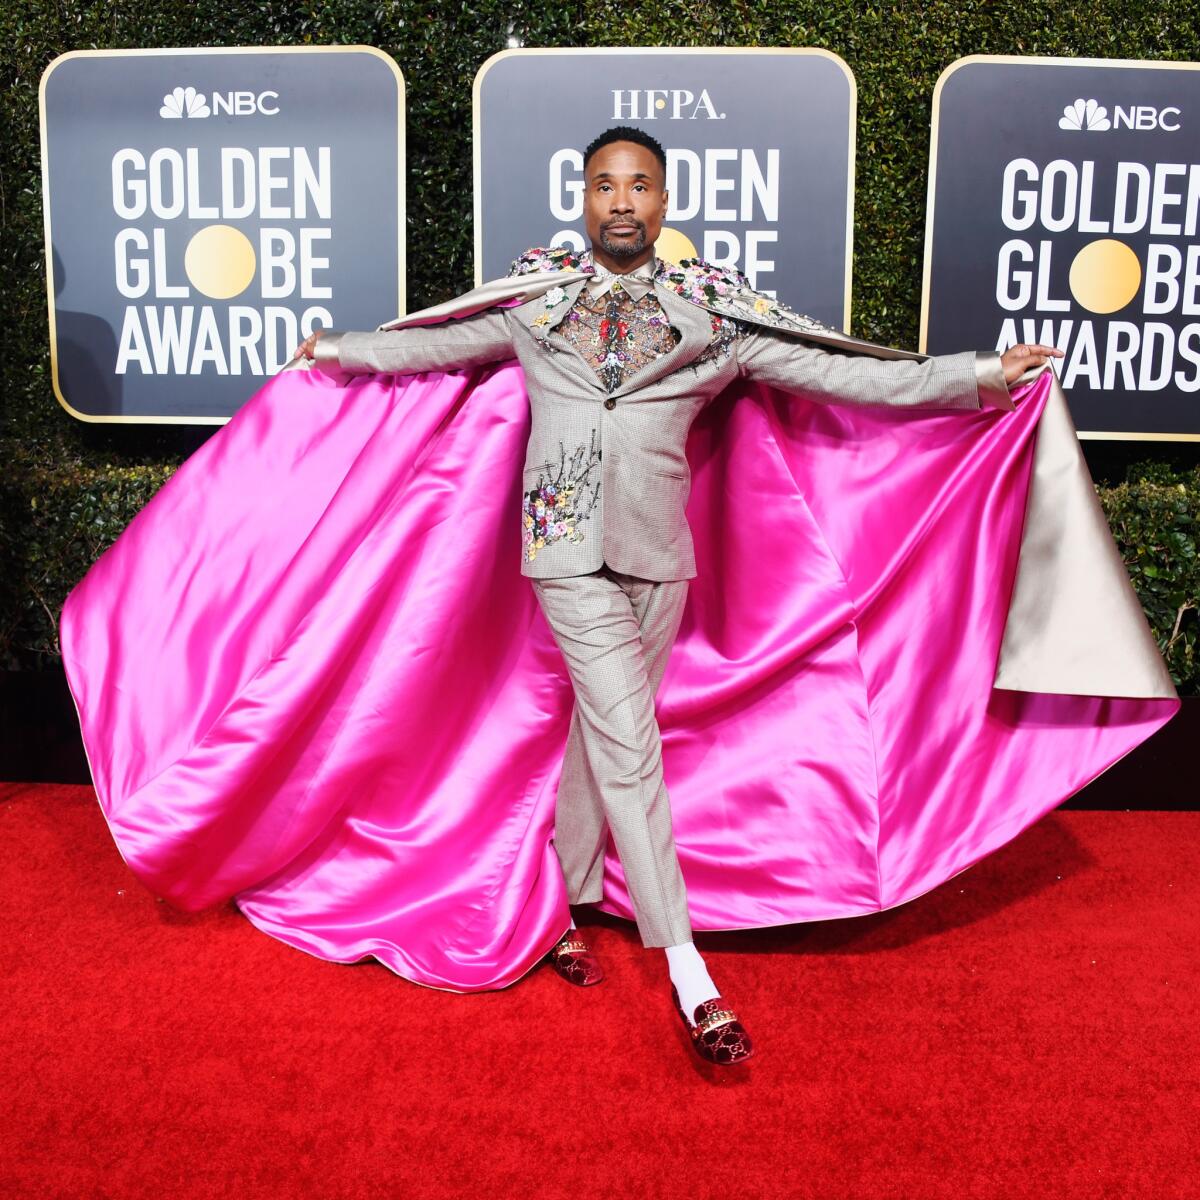 Tony-winning actor and singer Billy Porter at the 76th Golden Globe Awards at the Beverly Hilton Hotel on Jan. 6 in Beverly Hills. His embroidered suit and matching cape were designed by Randi Rahm.